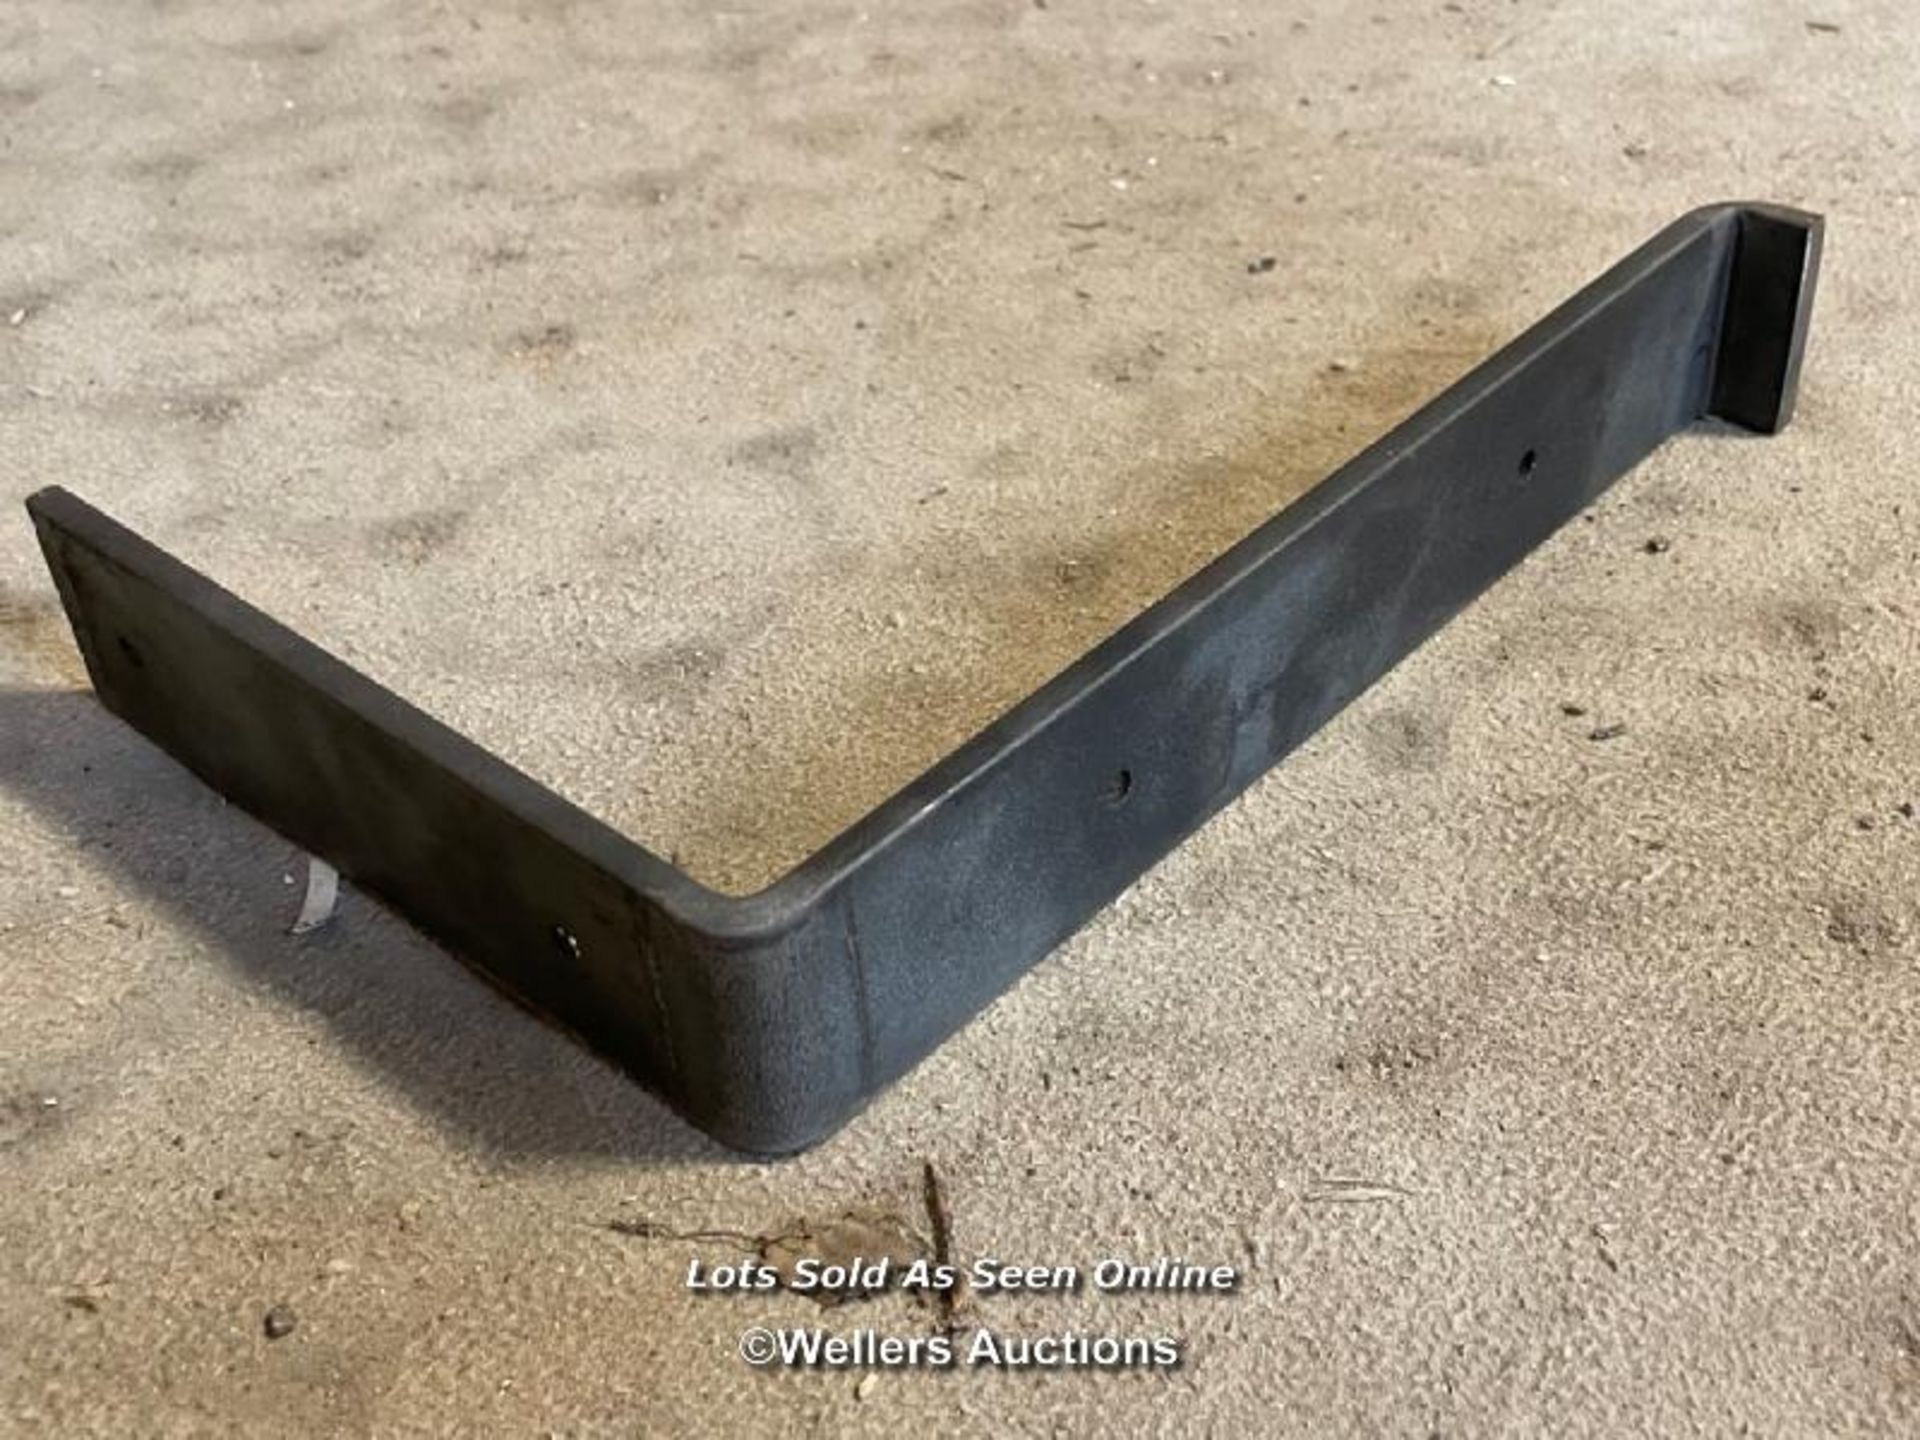 51 metal shelf brackets. 23cm x 15.5cm x 4cm for scaffold boards or other shelving - Image 2 of 5